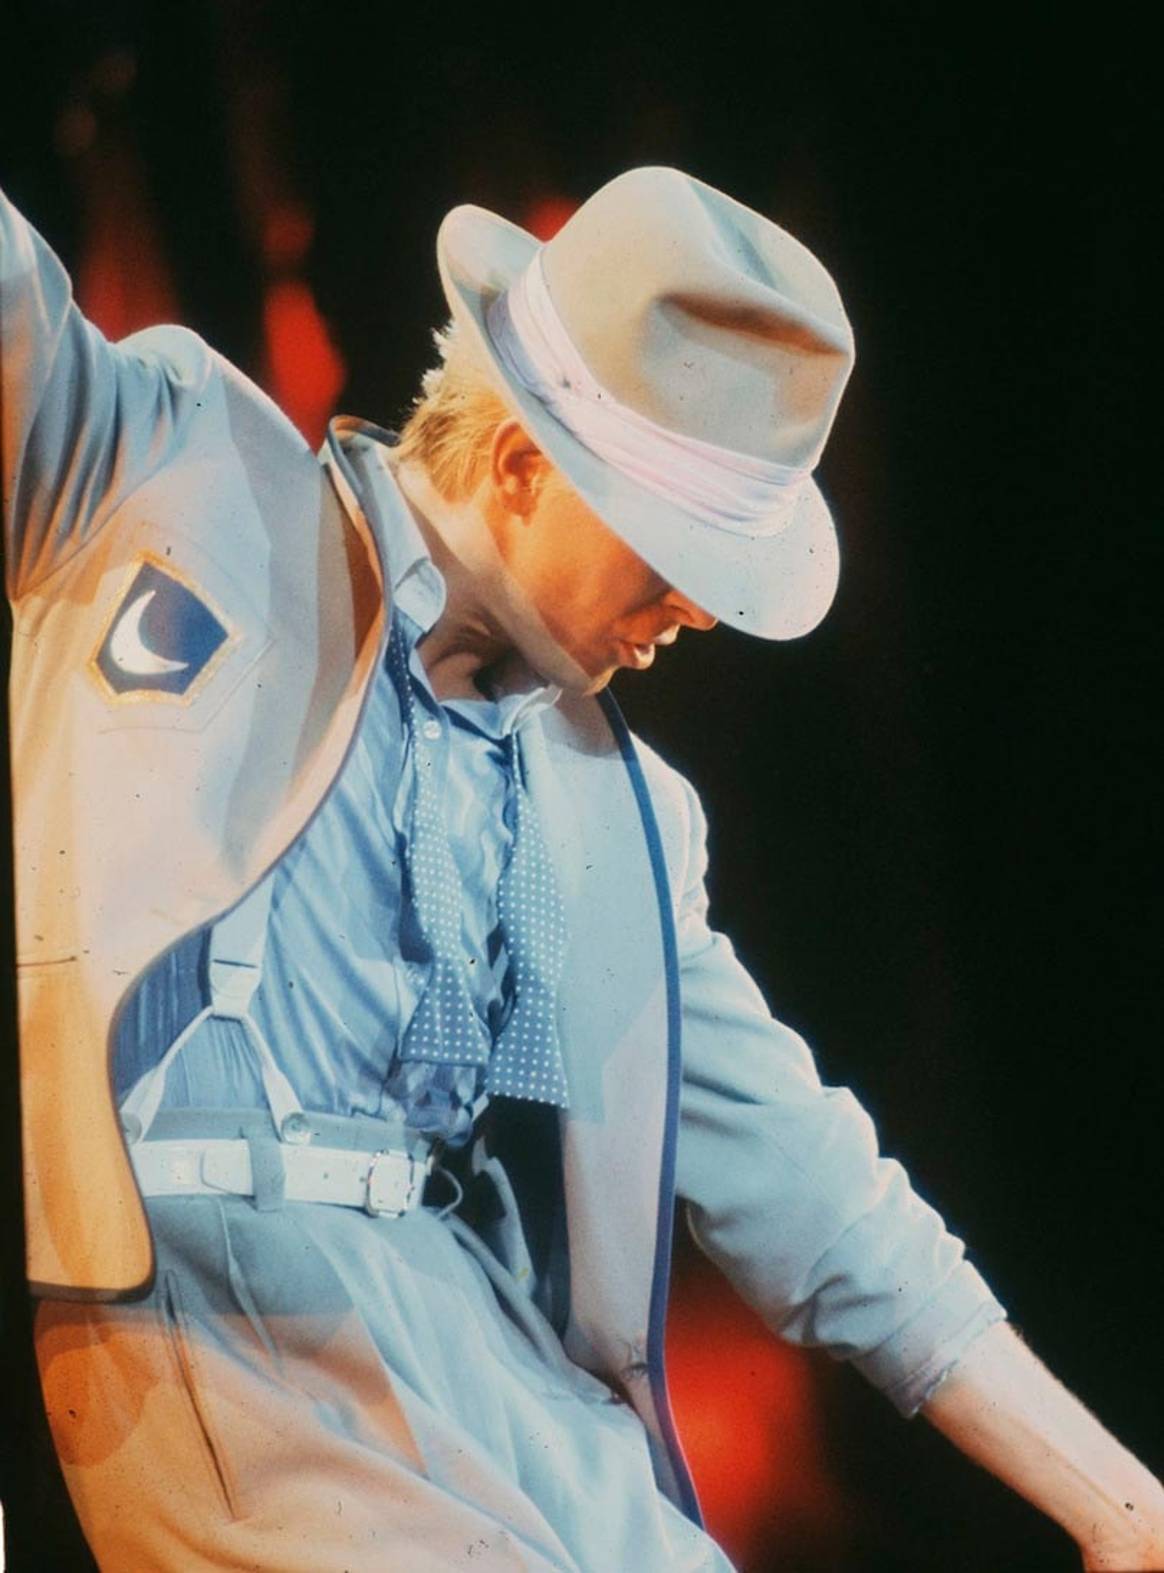 In Pictures: “David Bowie Is” Half a Century of Fashion